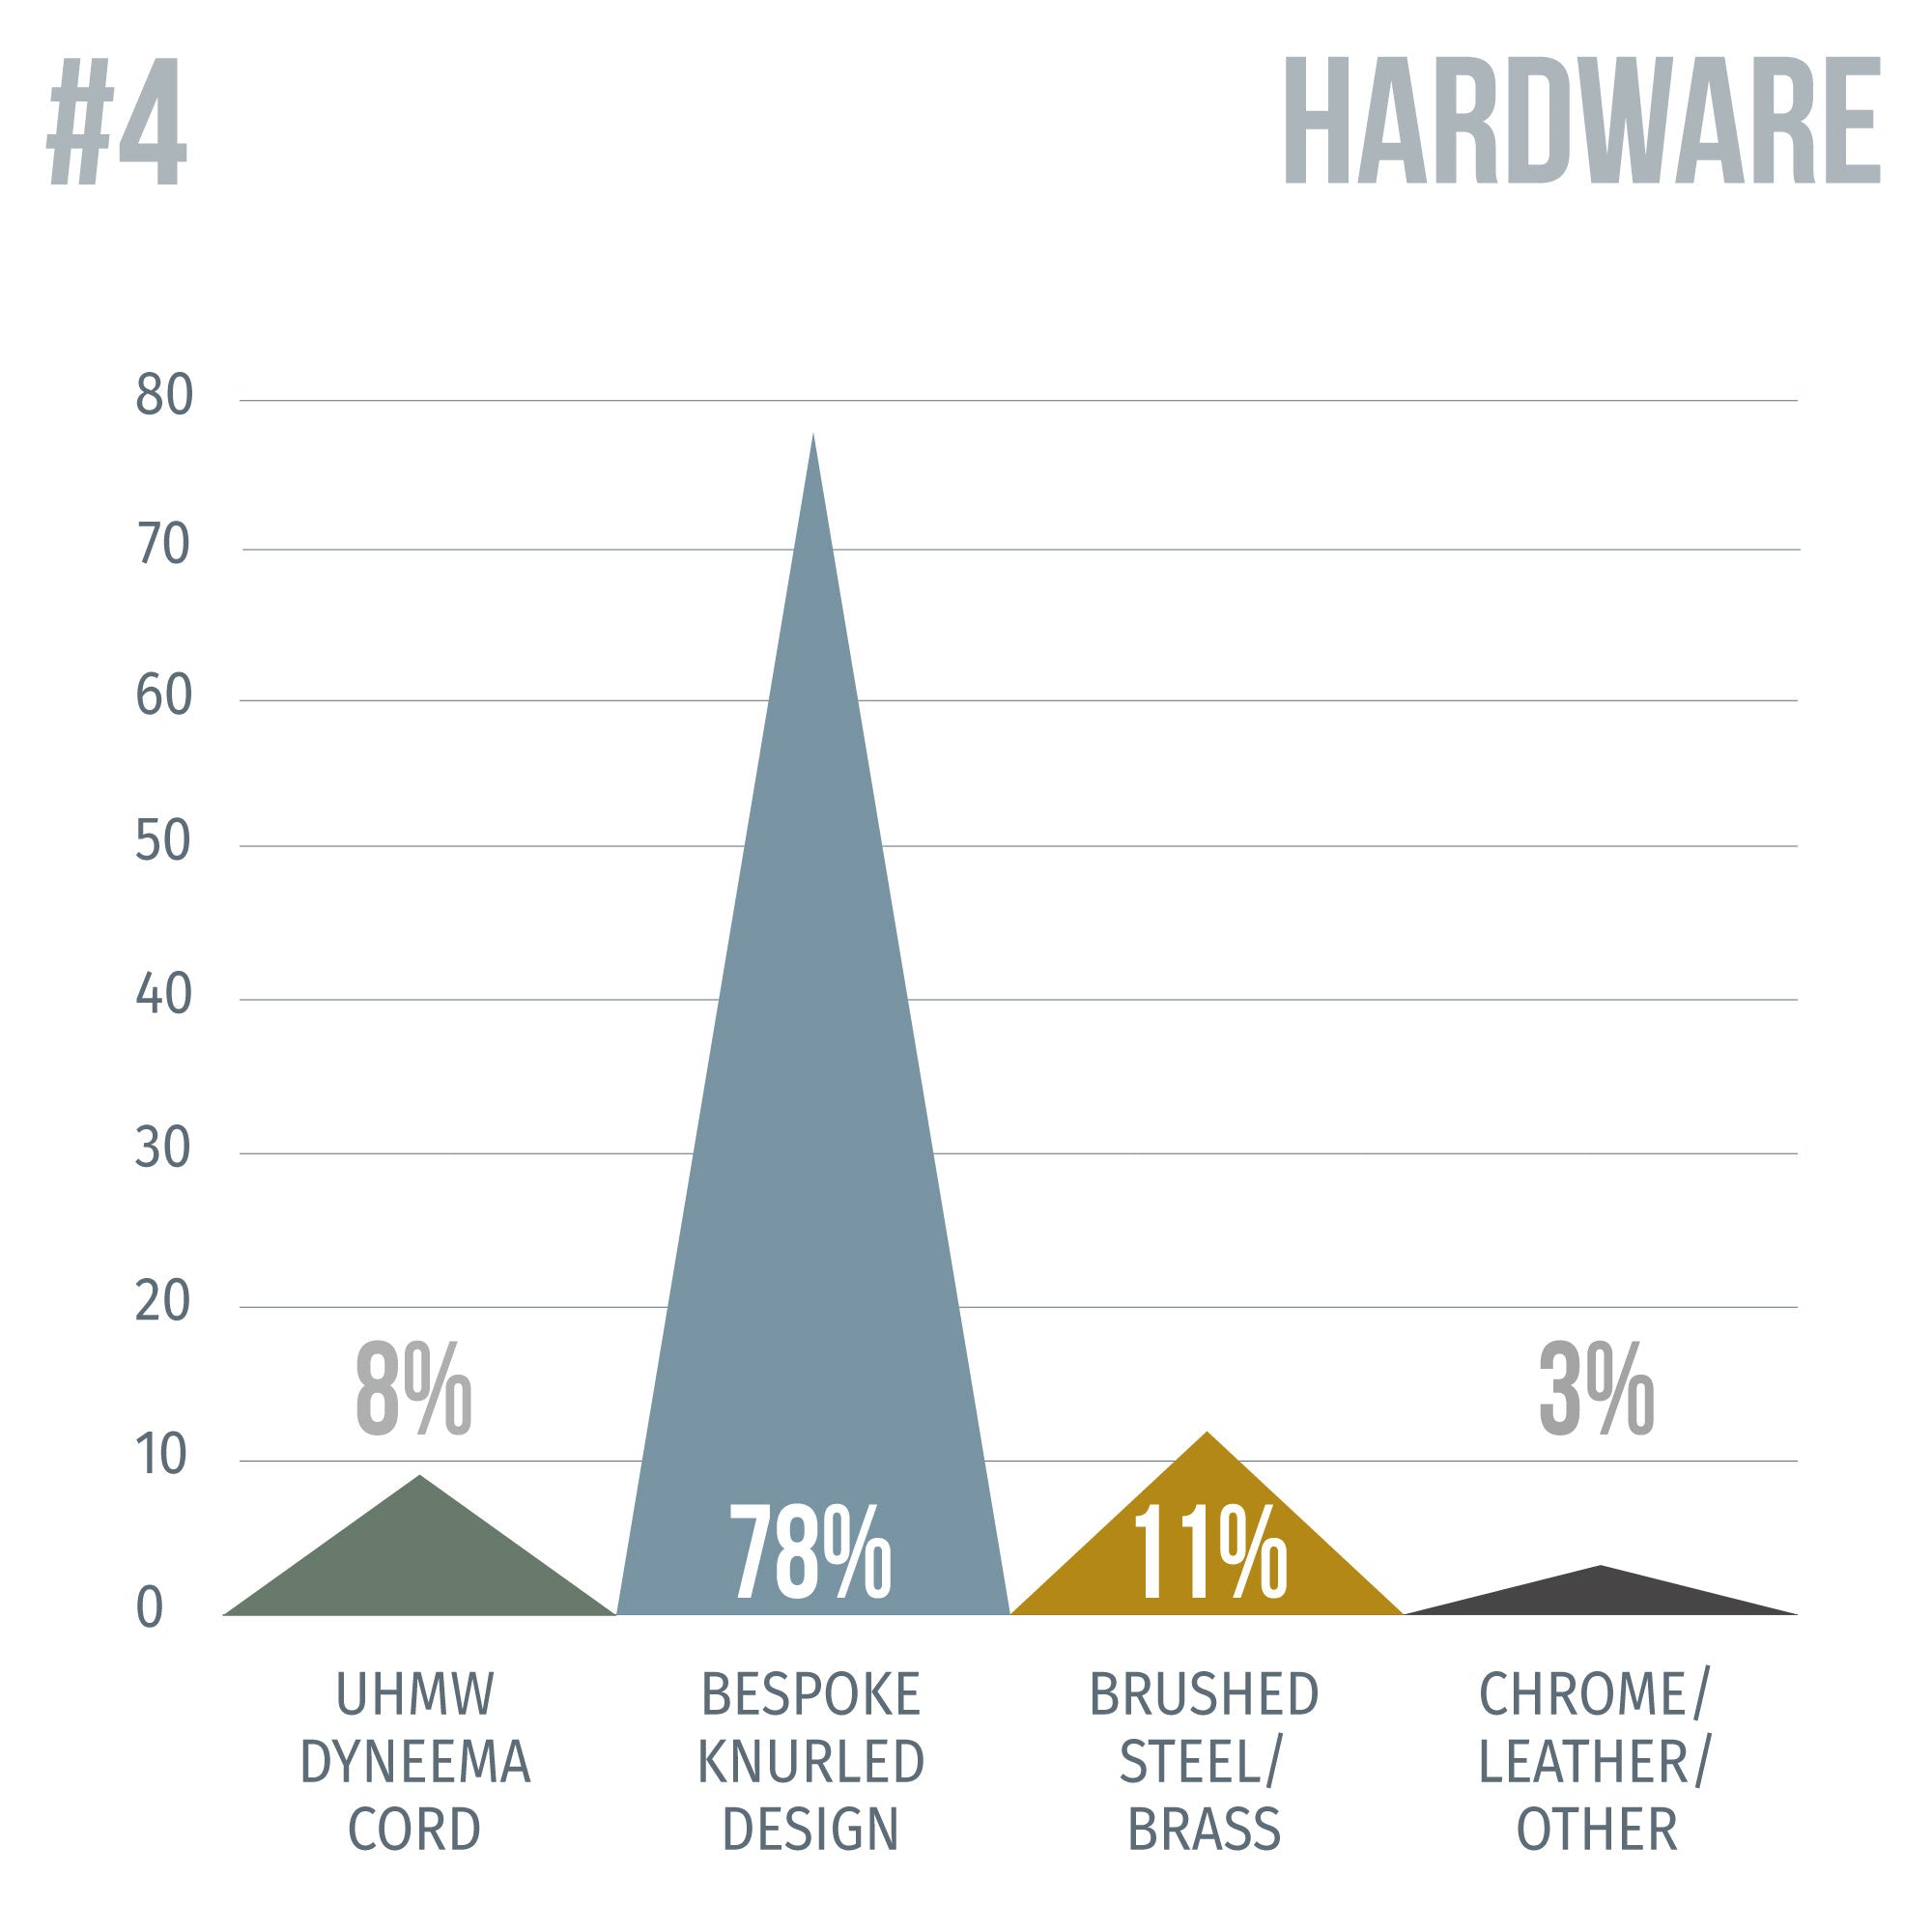 Infographic showing bespoke knurled zip pullers to be the most popular hardware option in a survey for the Wingback Backpack